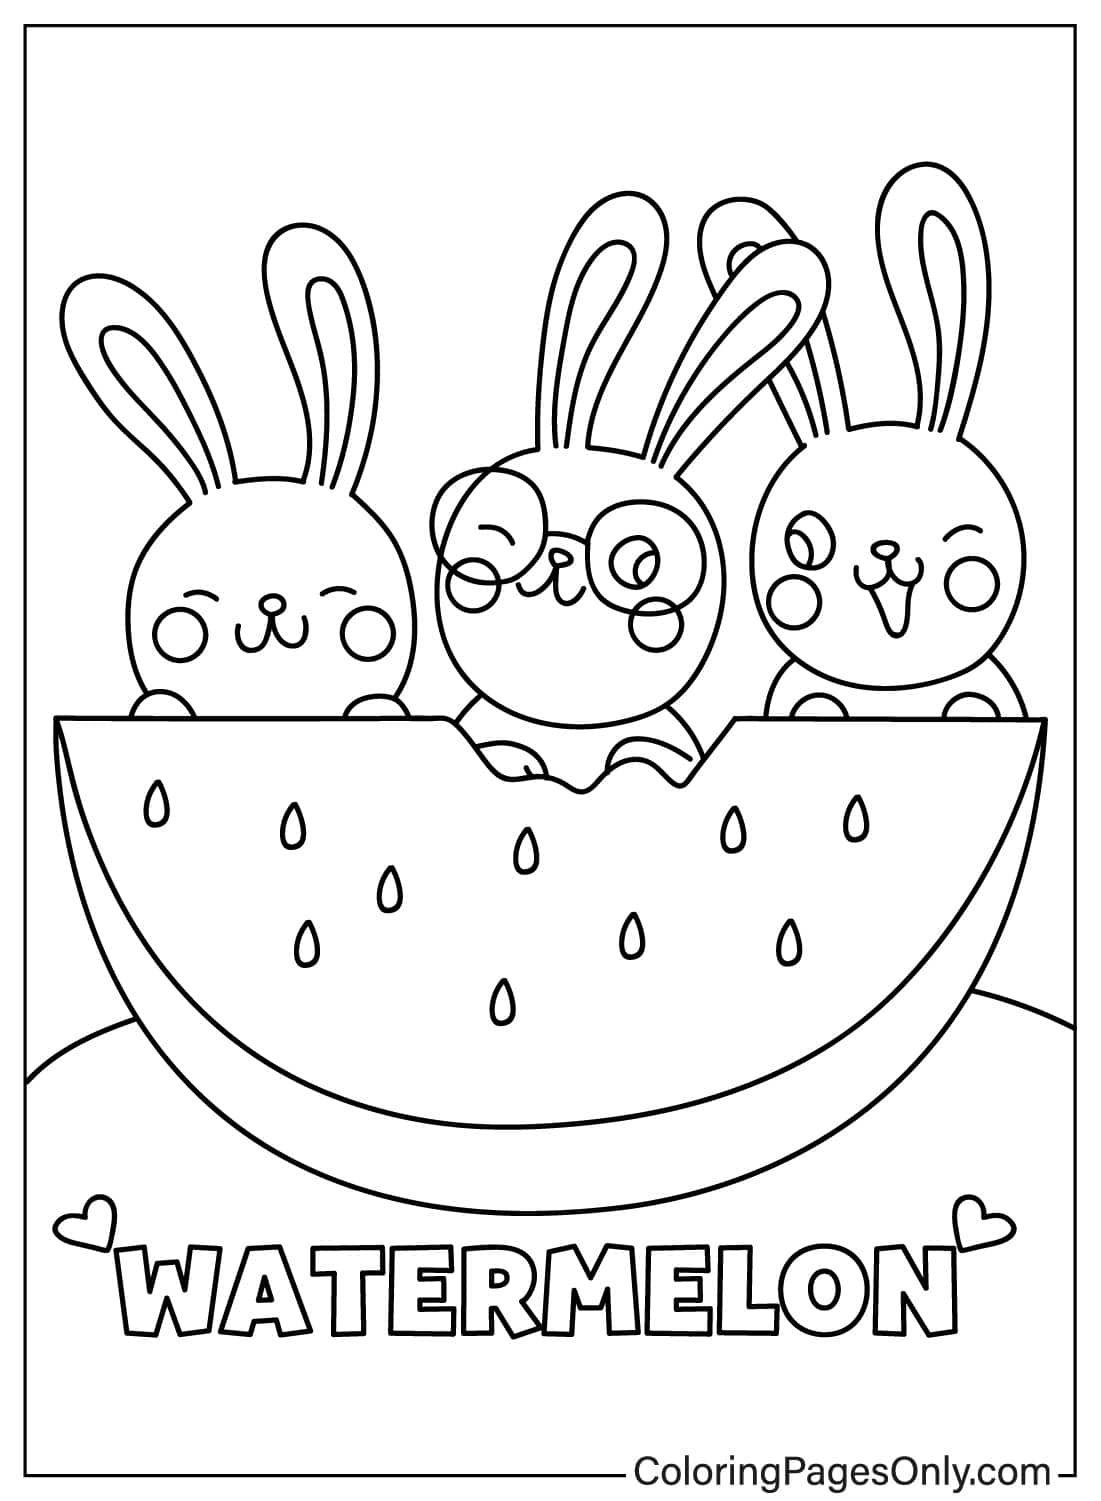 Three Rabbits Eating Watermelon Together from Watermelon